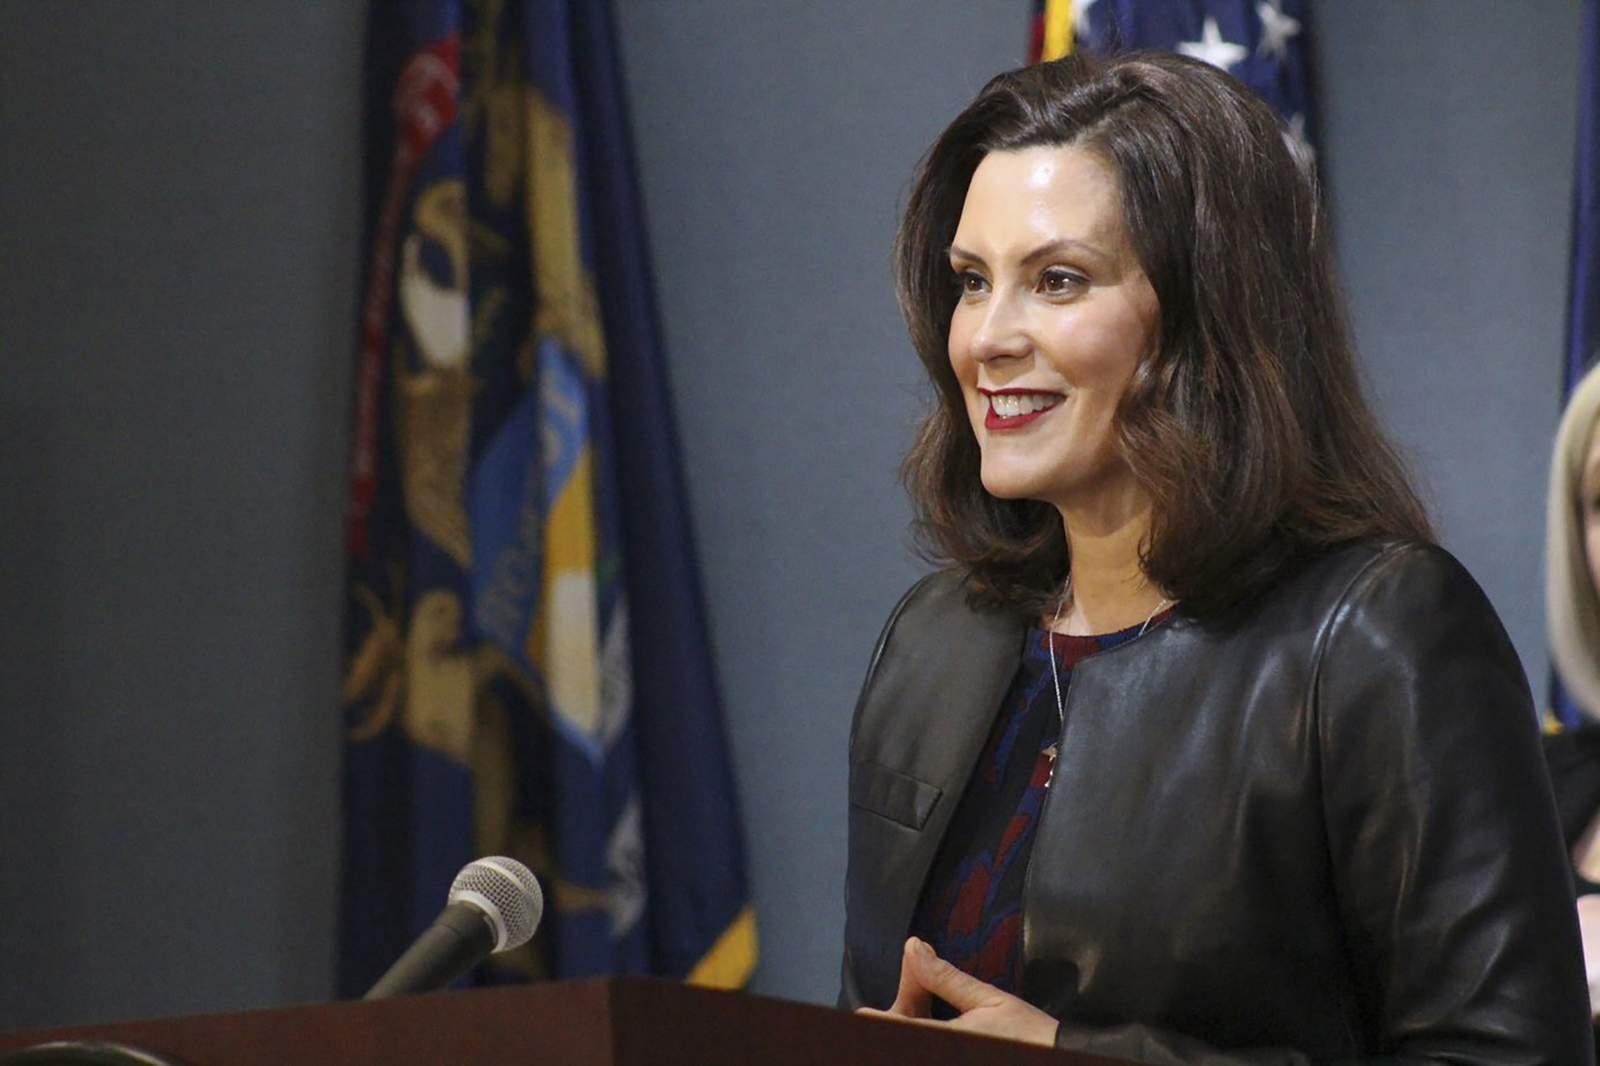 Gov. Whitmer approves of Detroit rapper’s ode to her during COVID-19 pandemic